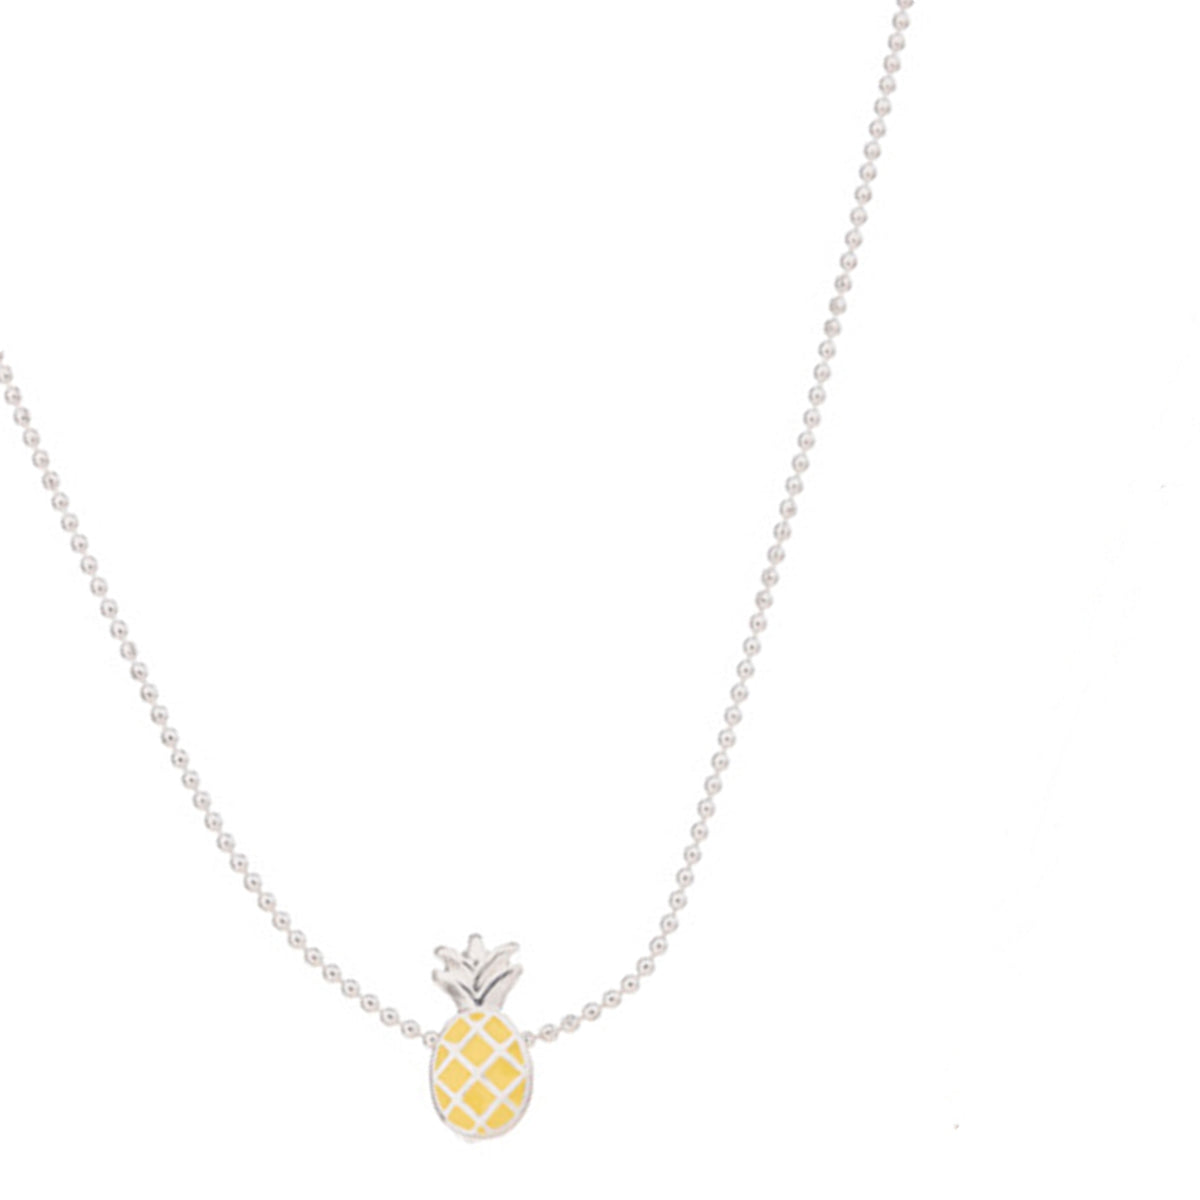 Colorful Enamel Pineapple Ball Chain Necklace